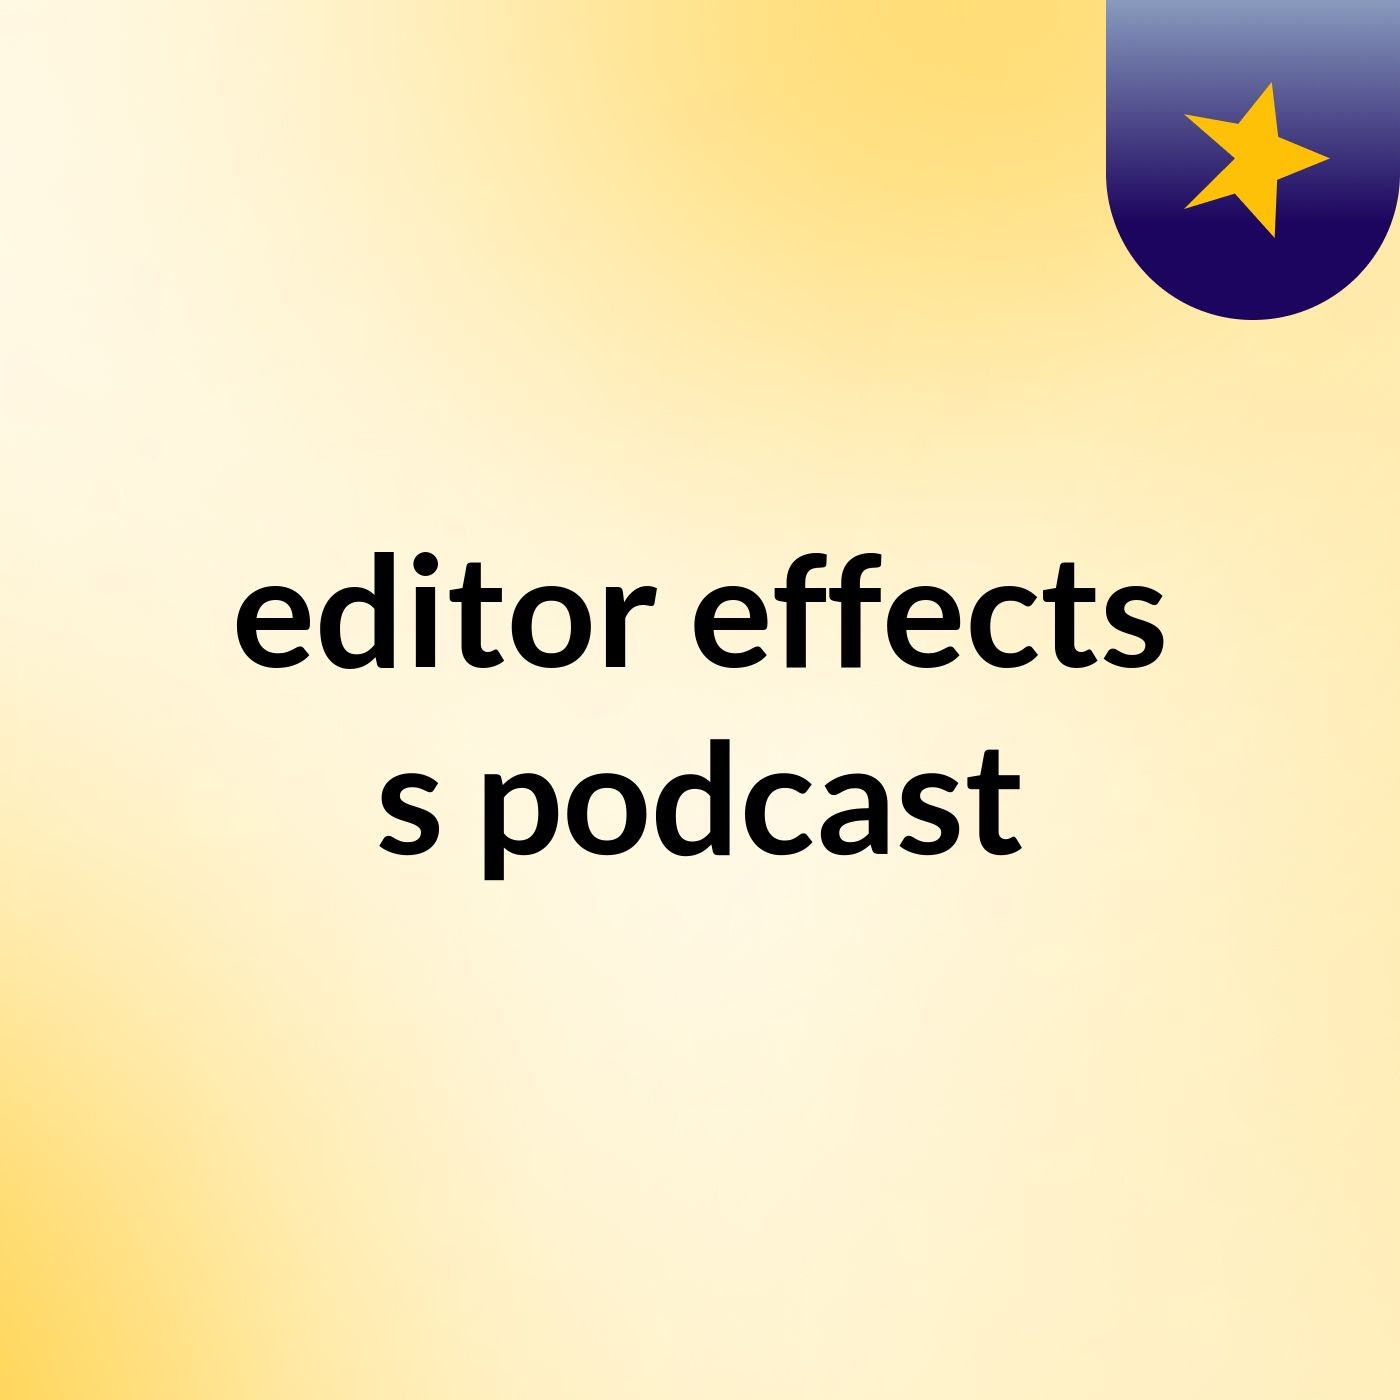 editor effects's podcast